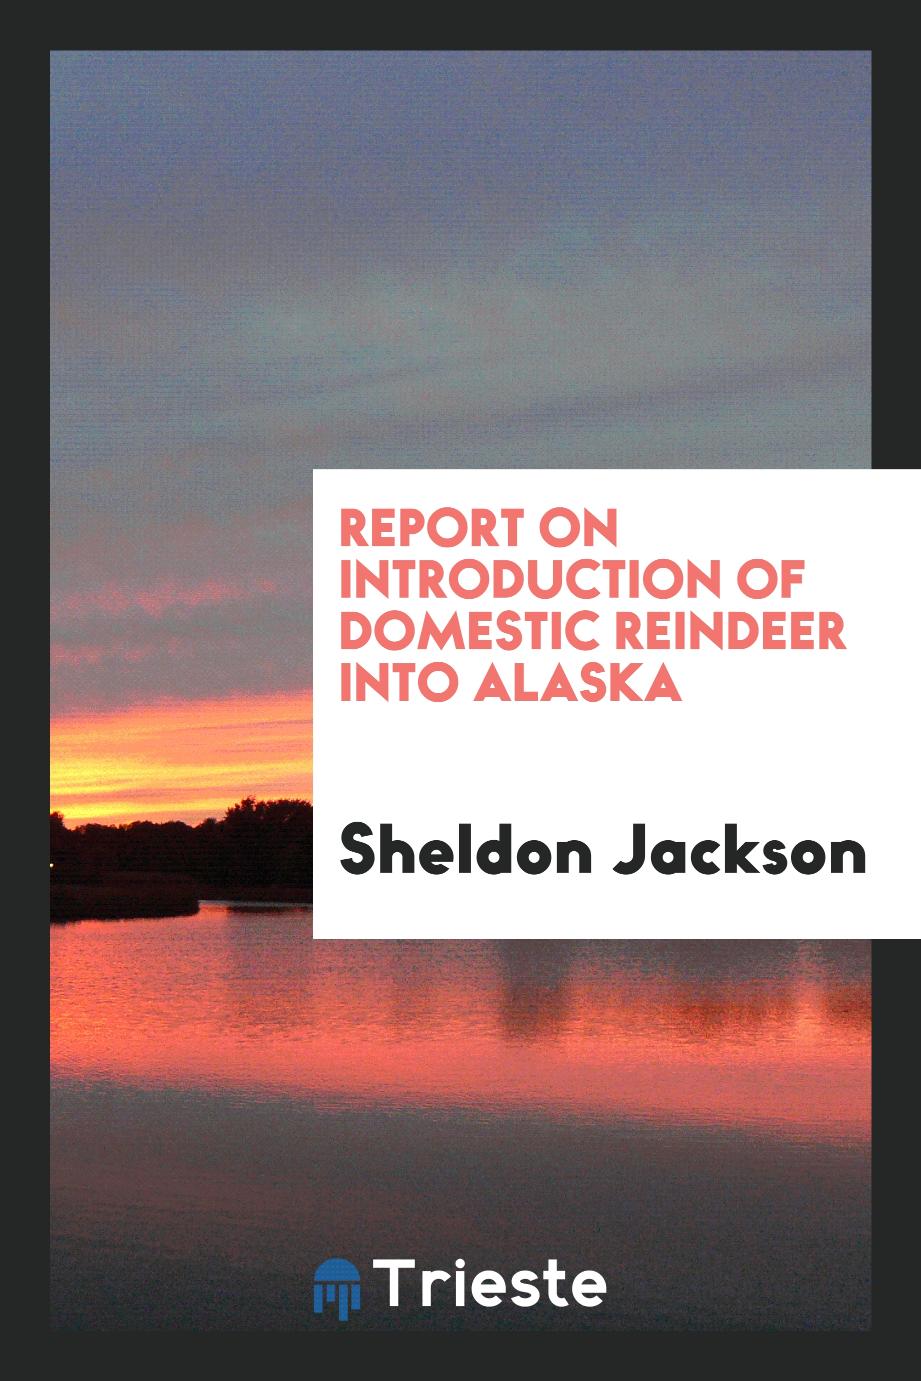 Report on Introduction of Domestic Reindeer into Alaska